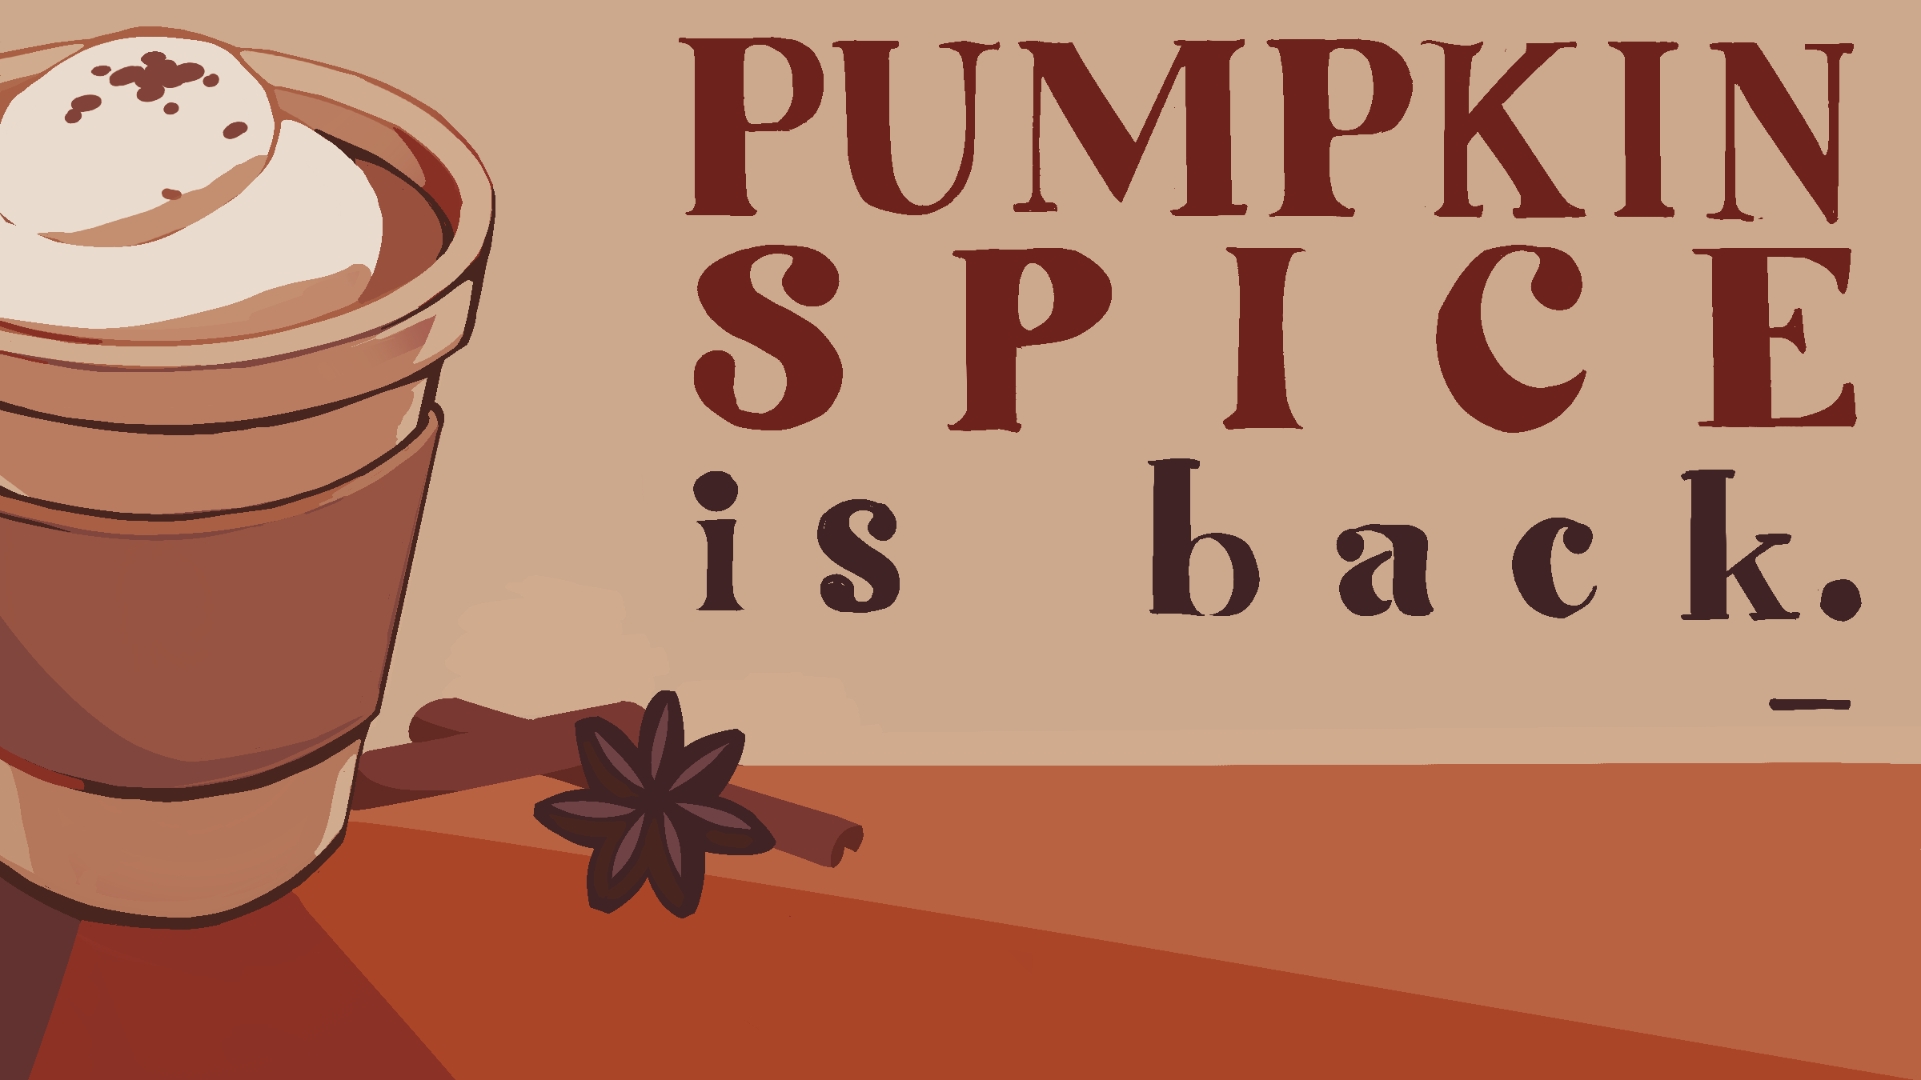 OPINION | Is the pumpkin spice craze valid?